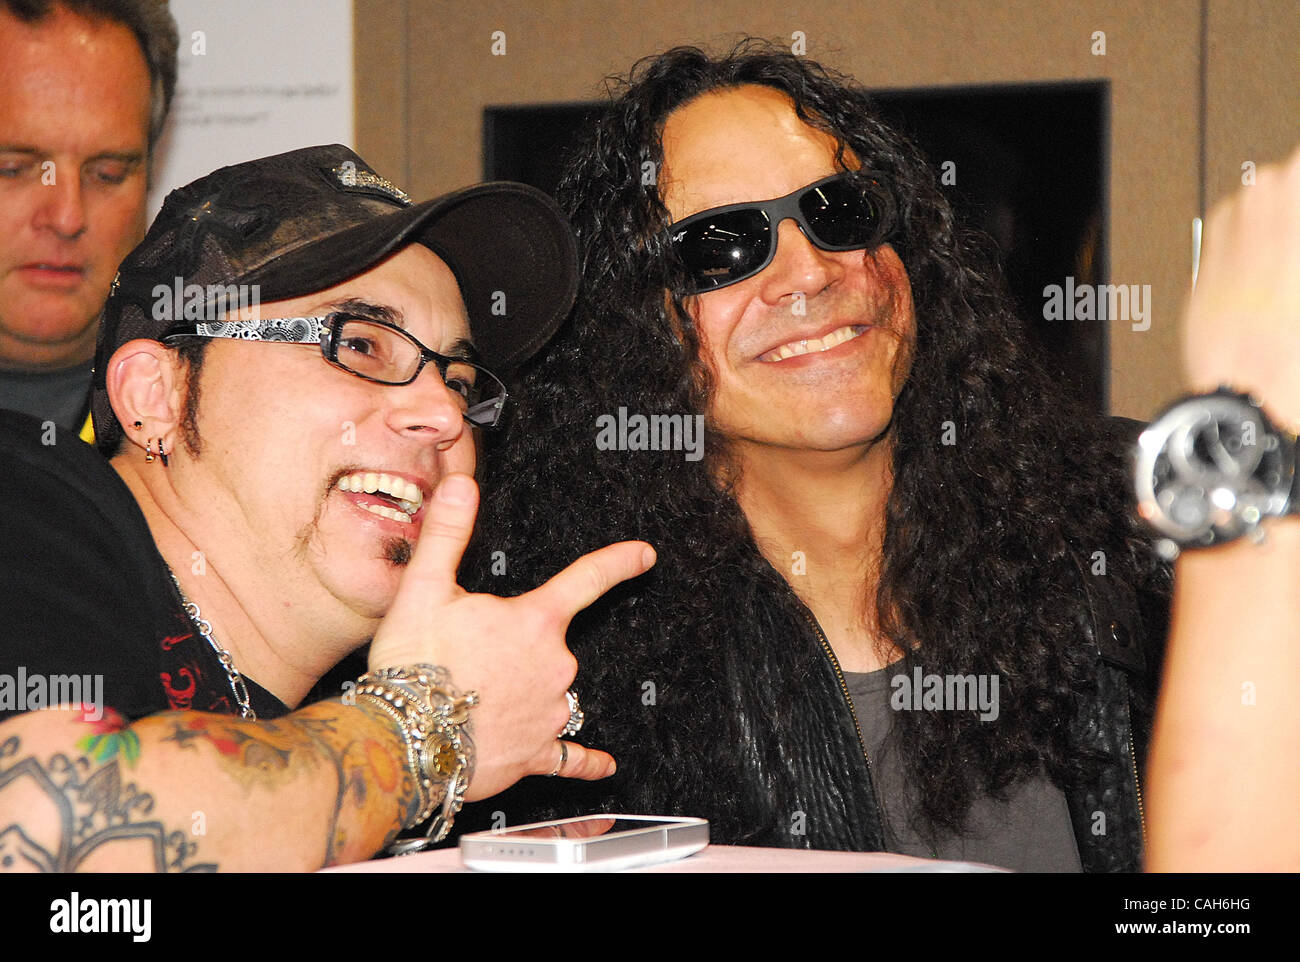 Jan 14, 2011 - Anaheim, California, U.S. - Alice in Chains bass player MIKE INEZ poses for photos with fans at the Dean Markley booth during the 2011 Winter NAMM convention. (Credit Image: © Valerie Nerres/ZUMAPRESS.com) Stock Photo